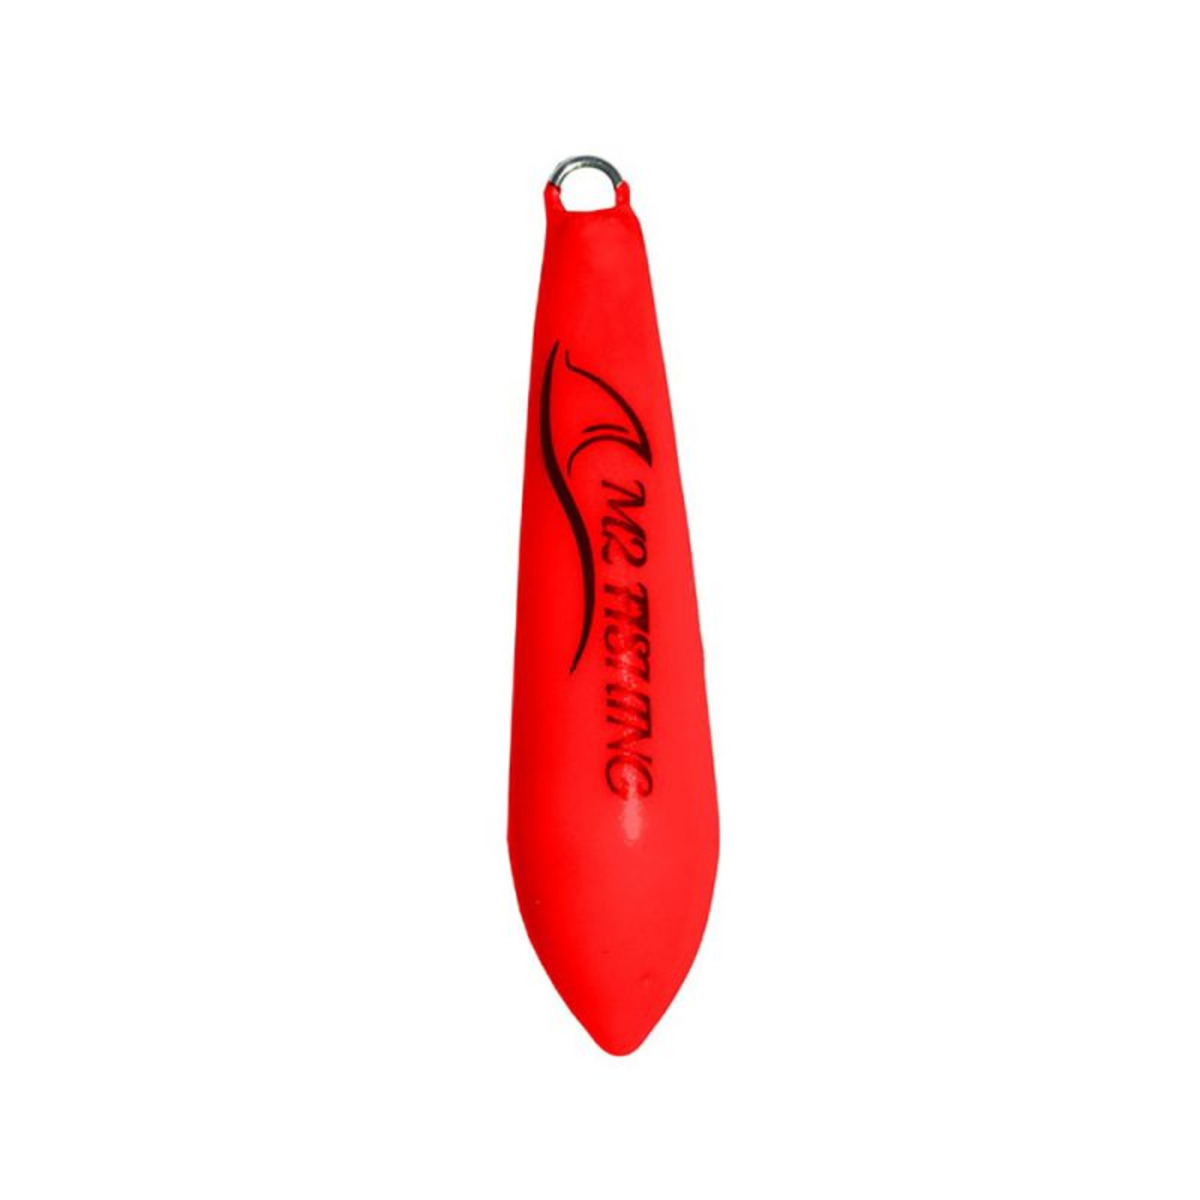 M2 Fishing Surf Dinamic Rosso Fosforescente - 75 g